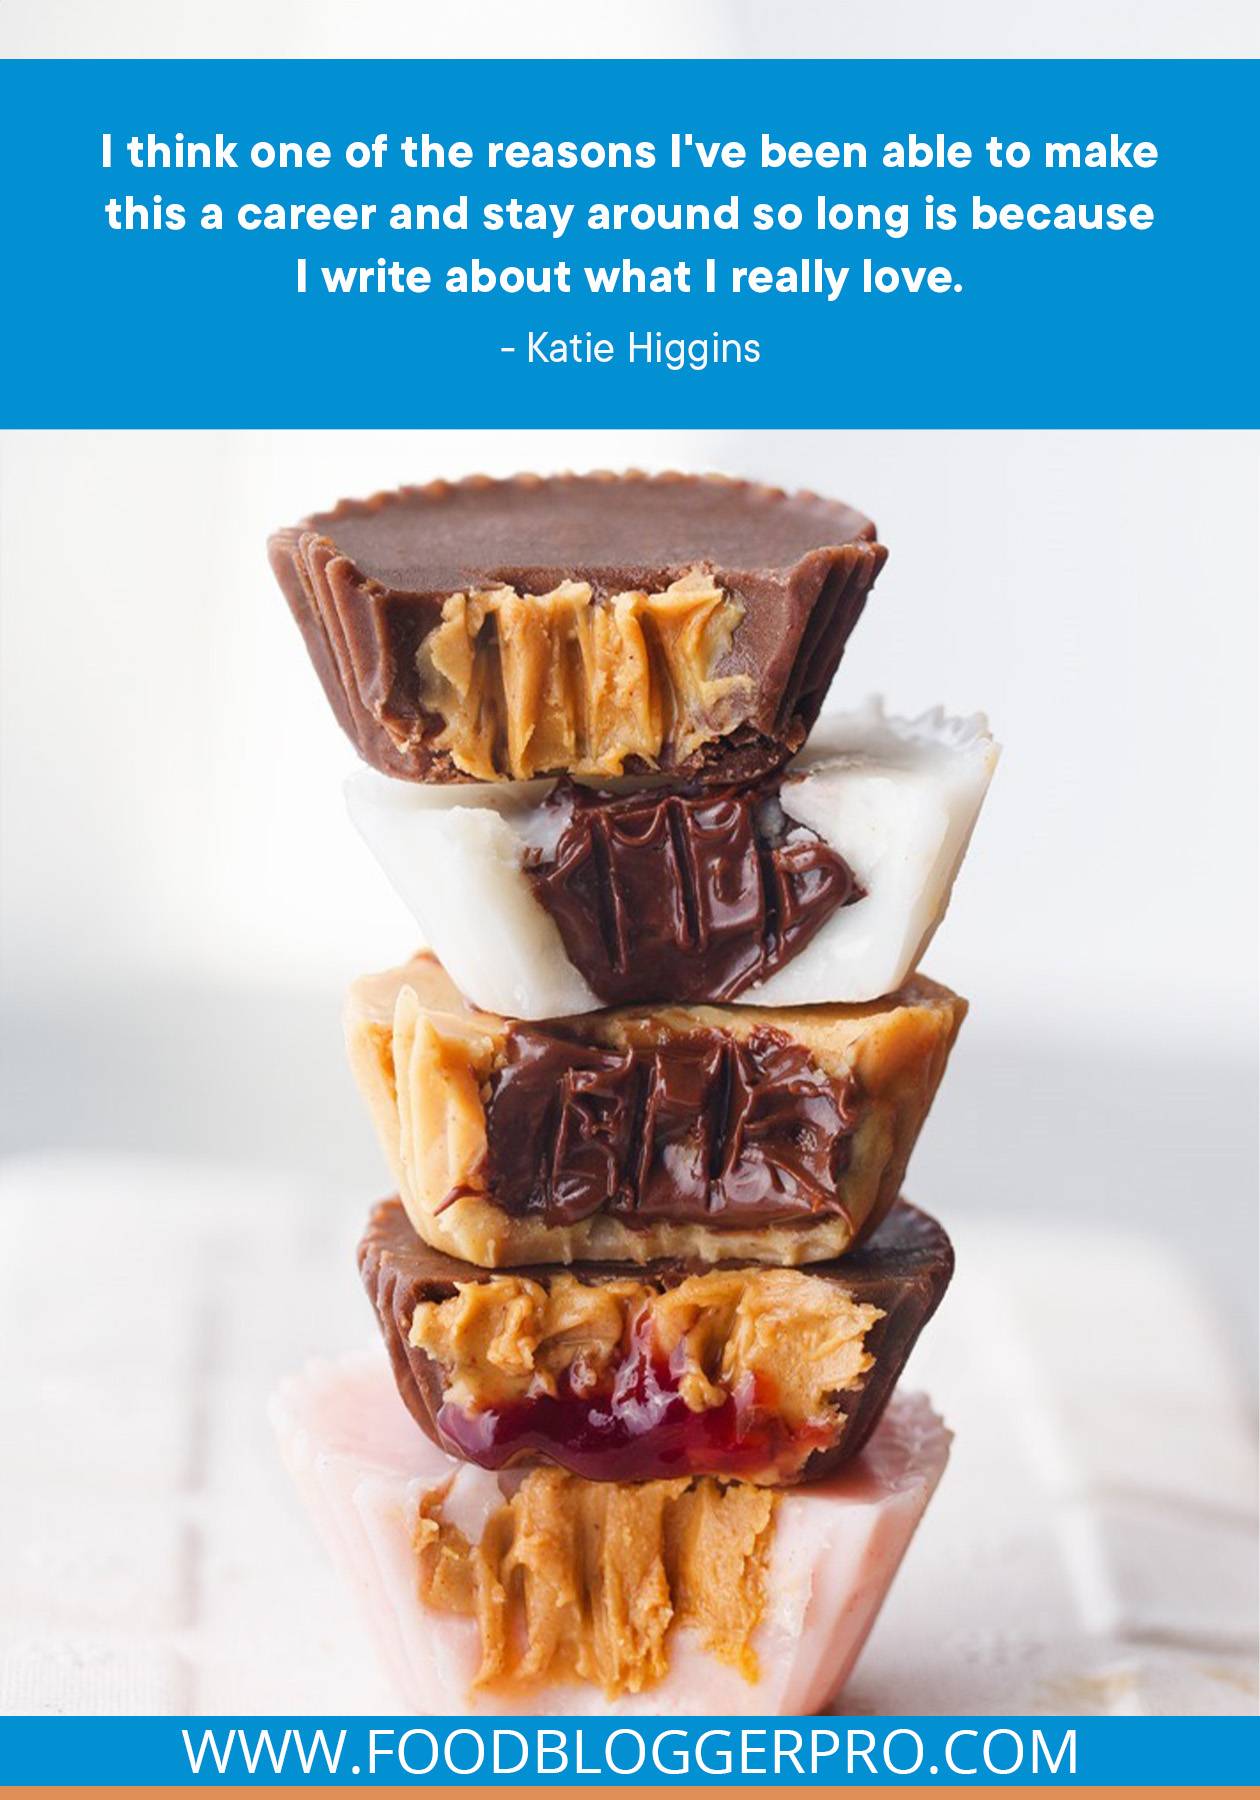 A photograph of a stack of chocolate cups with a quote from Katie Higgins' episode of The Food Blogger Pro Podcast that reads, "I think one of the reasons I've been able to make this a career and stay around so long is because I write about what I really love."